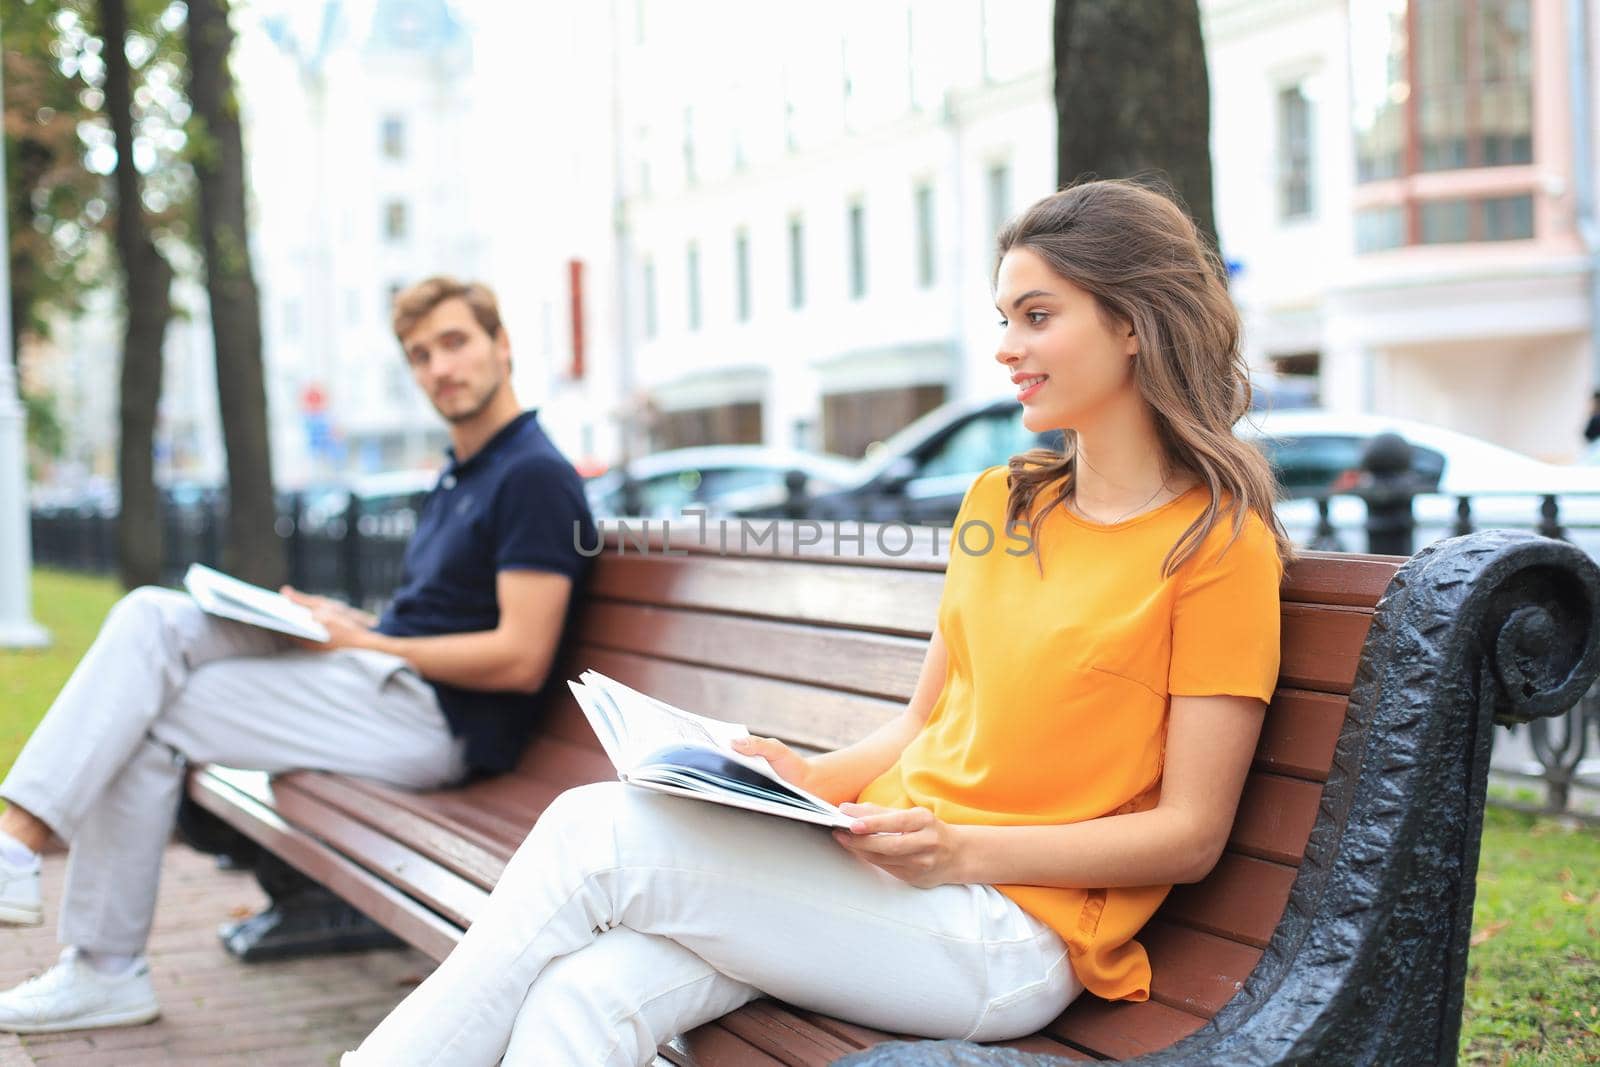 Romantic young couple in summer clothes smiling and reading books together while sitting on bench in city street